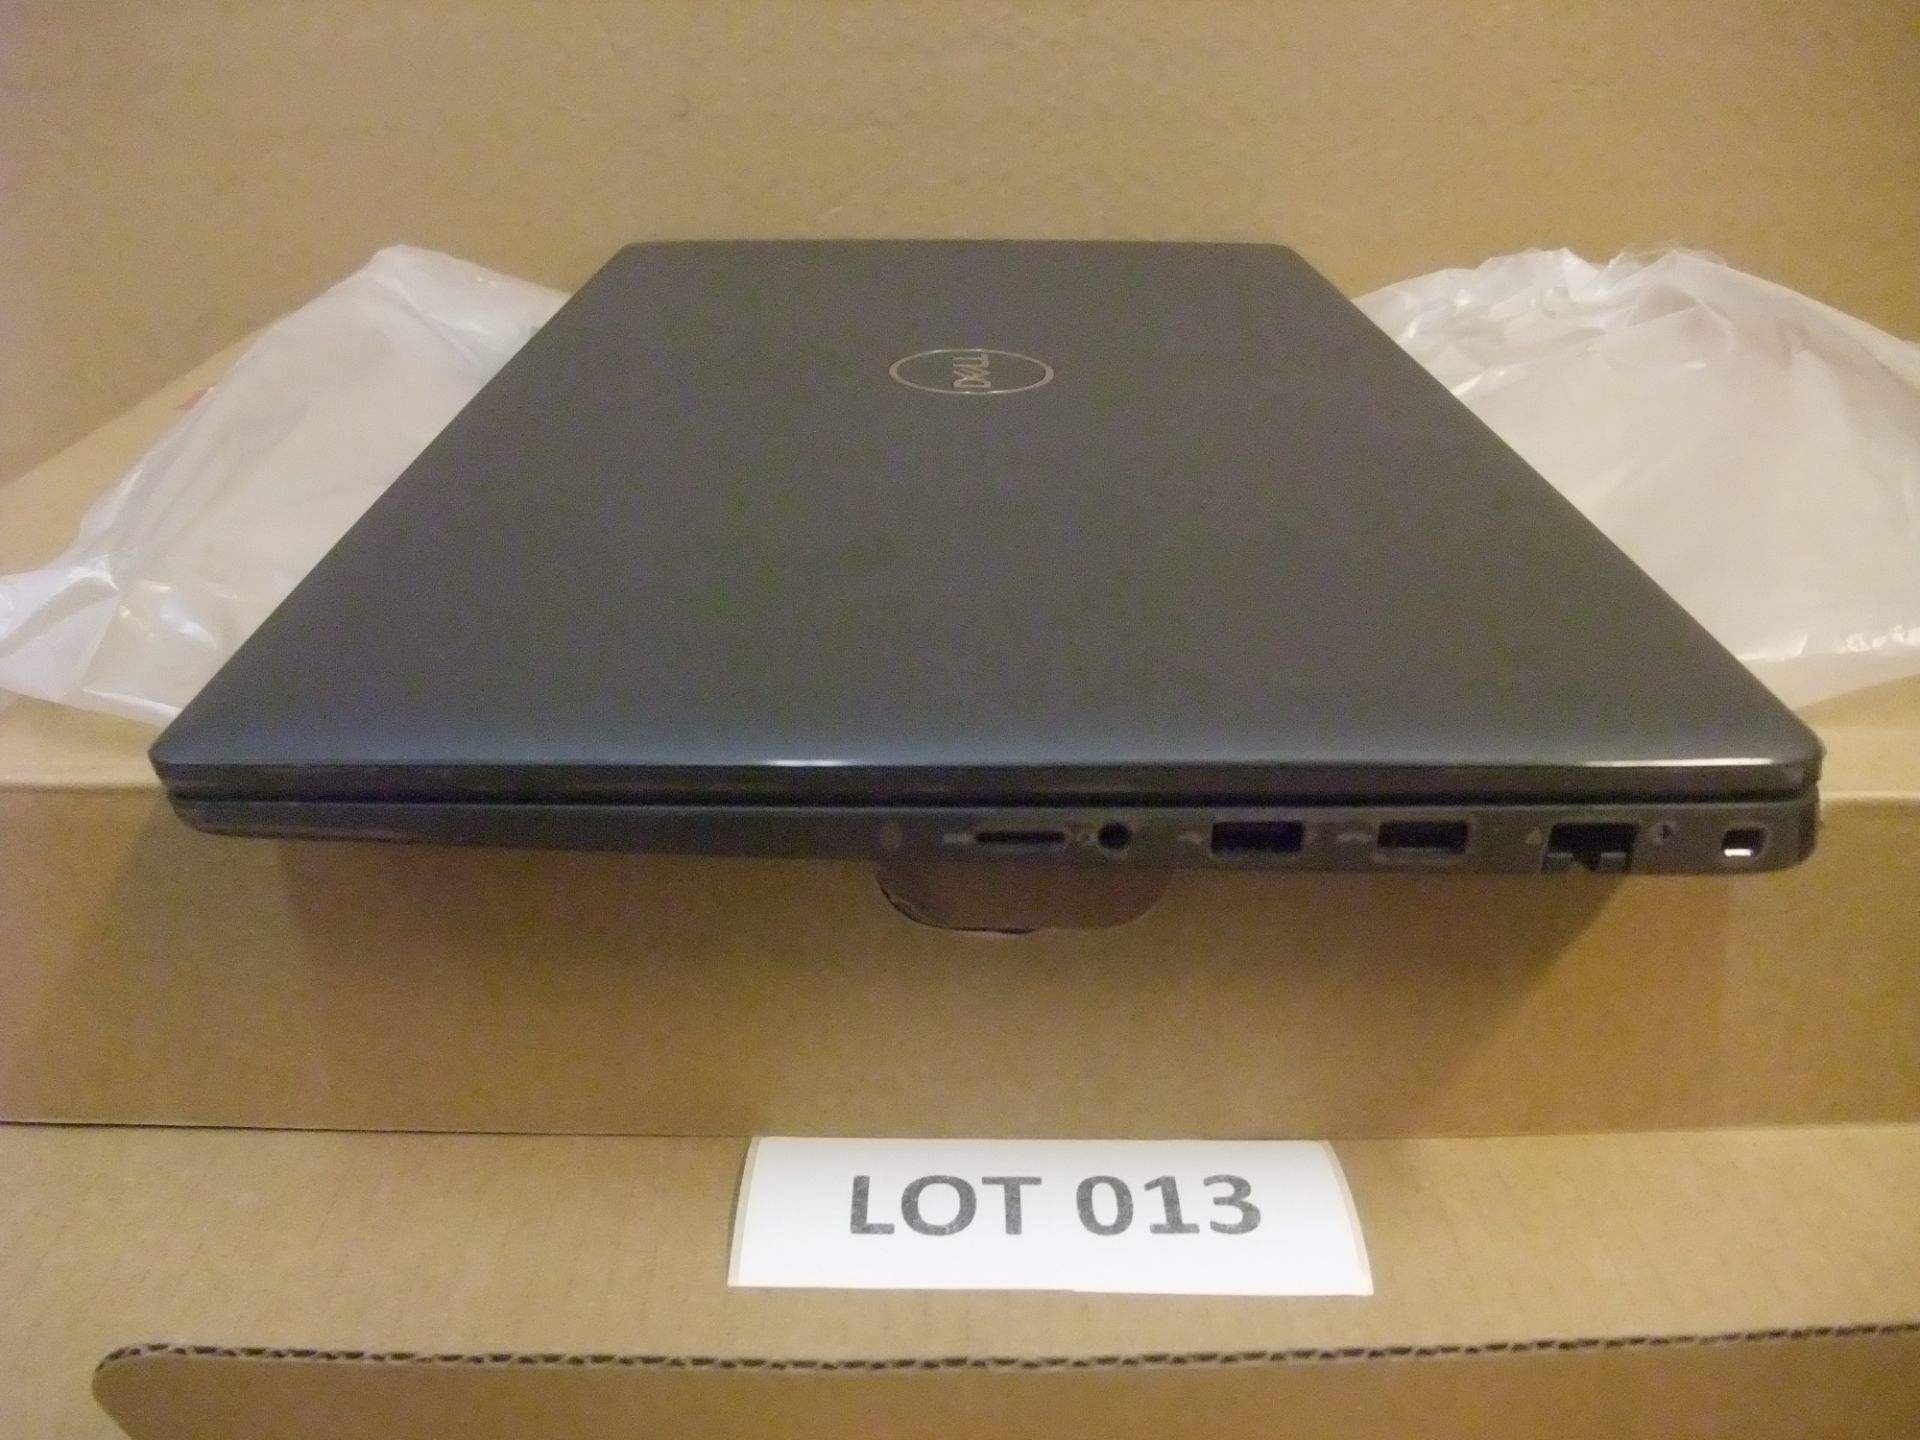 Dell Latitude 3520 Laptop (understood to be unused in box) - i7-1165G7, 8Gb RAM, 256Gb M2 drive, - Image 5 of 6